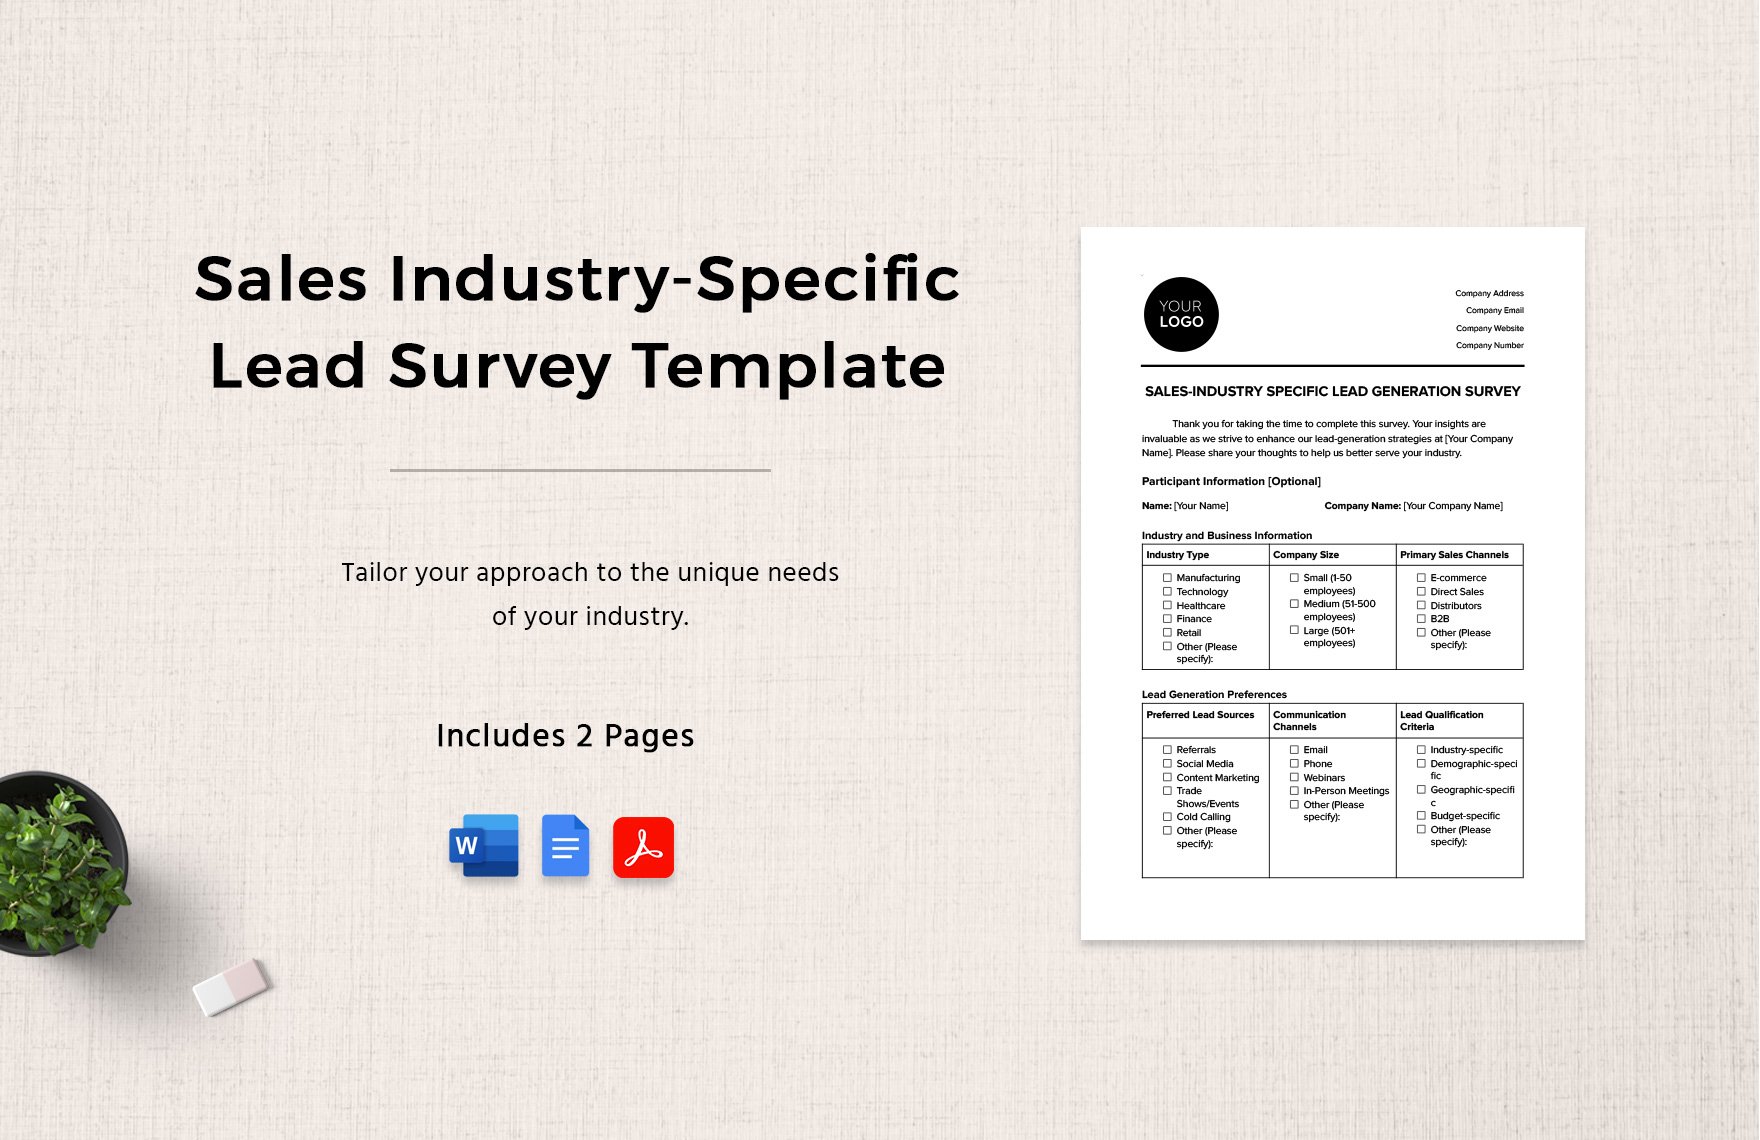 Sales Industry-Specific Lead Survey Template in Word, Google Docs, PDF